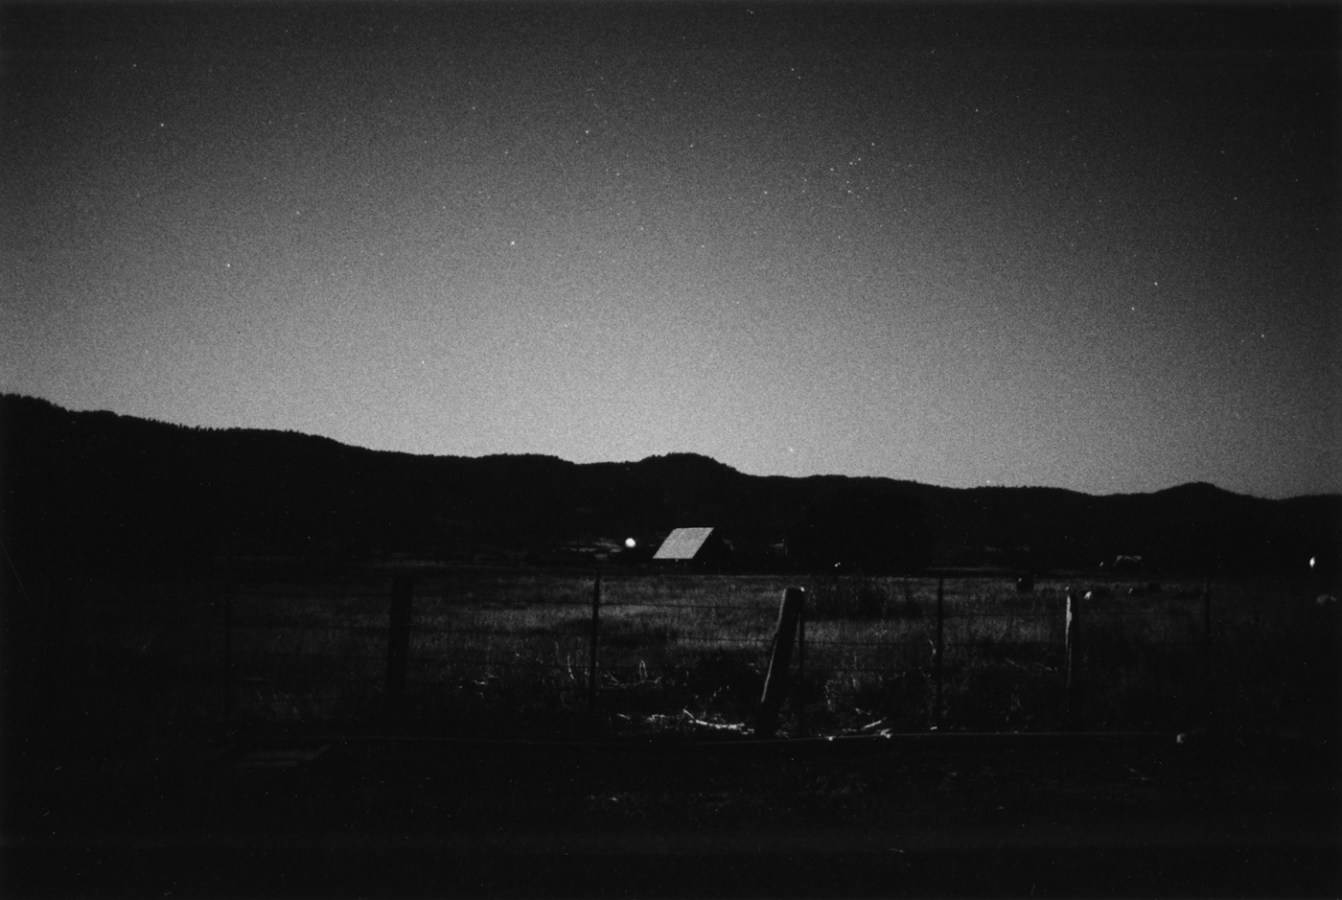 Black-and-white photograph of a vallery at dusk with a fence and a structure in the center fo the frame and mountains on the horizon